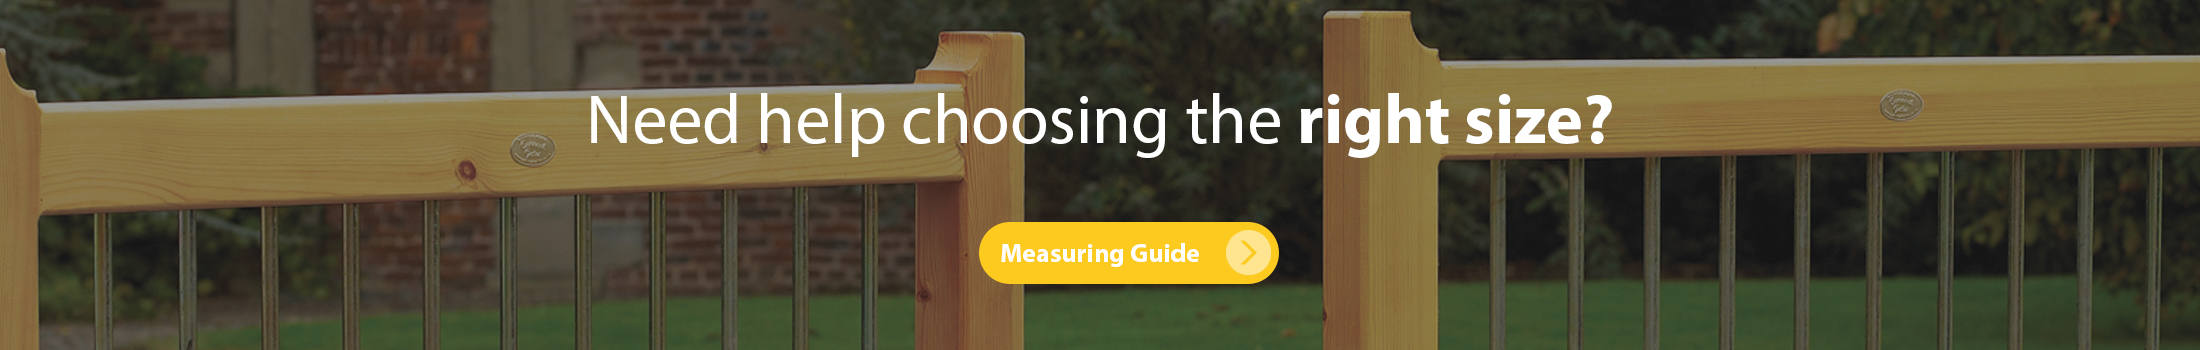 View the measuring guide here